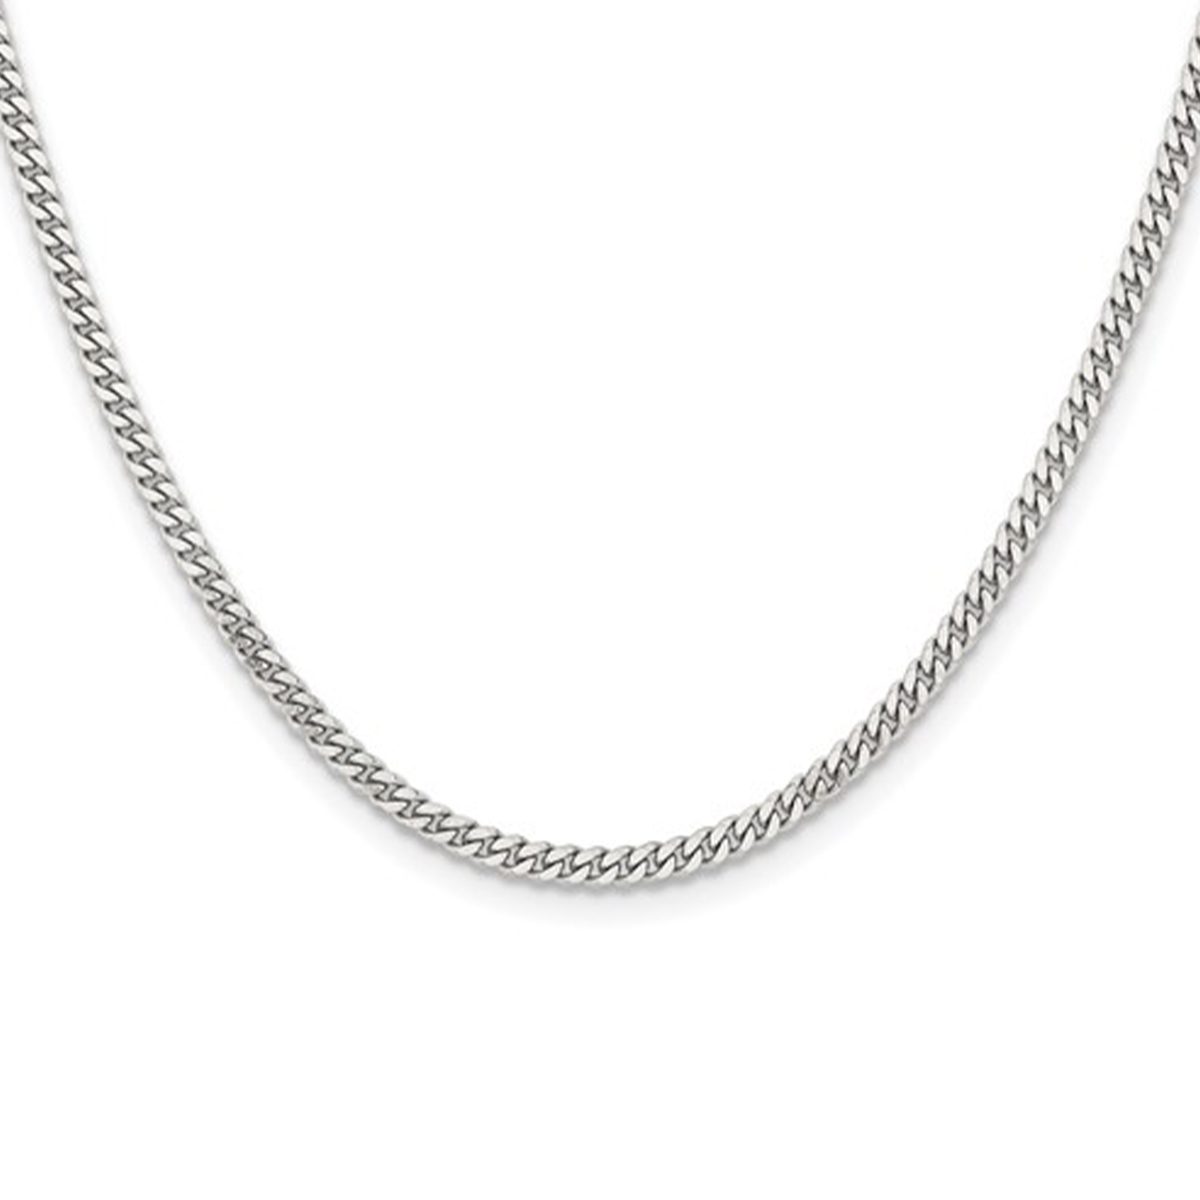 Stainless Steel 24-Inch 3 mm Flat Curb Chain